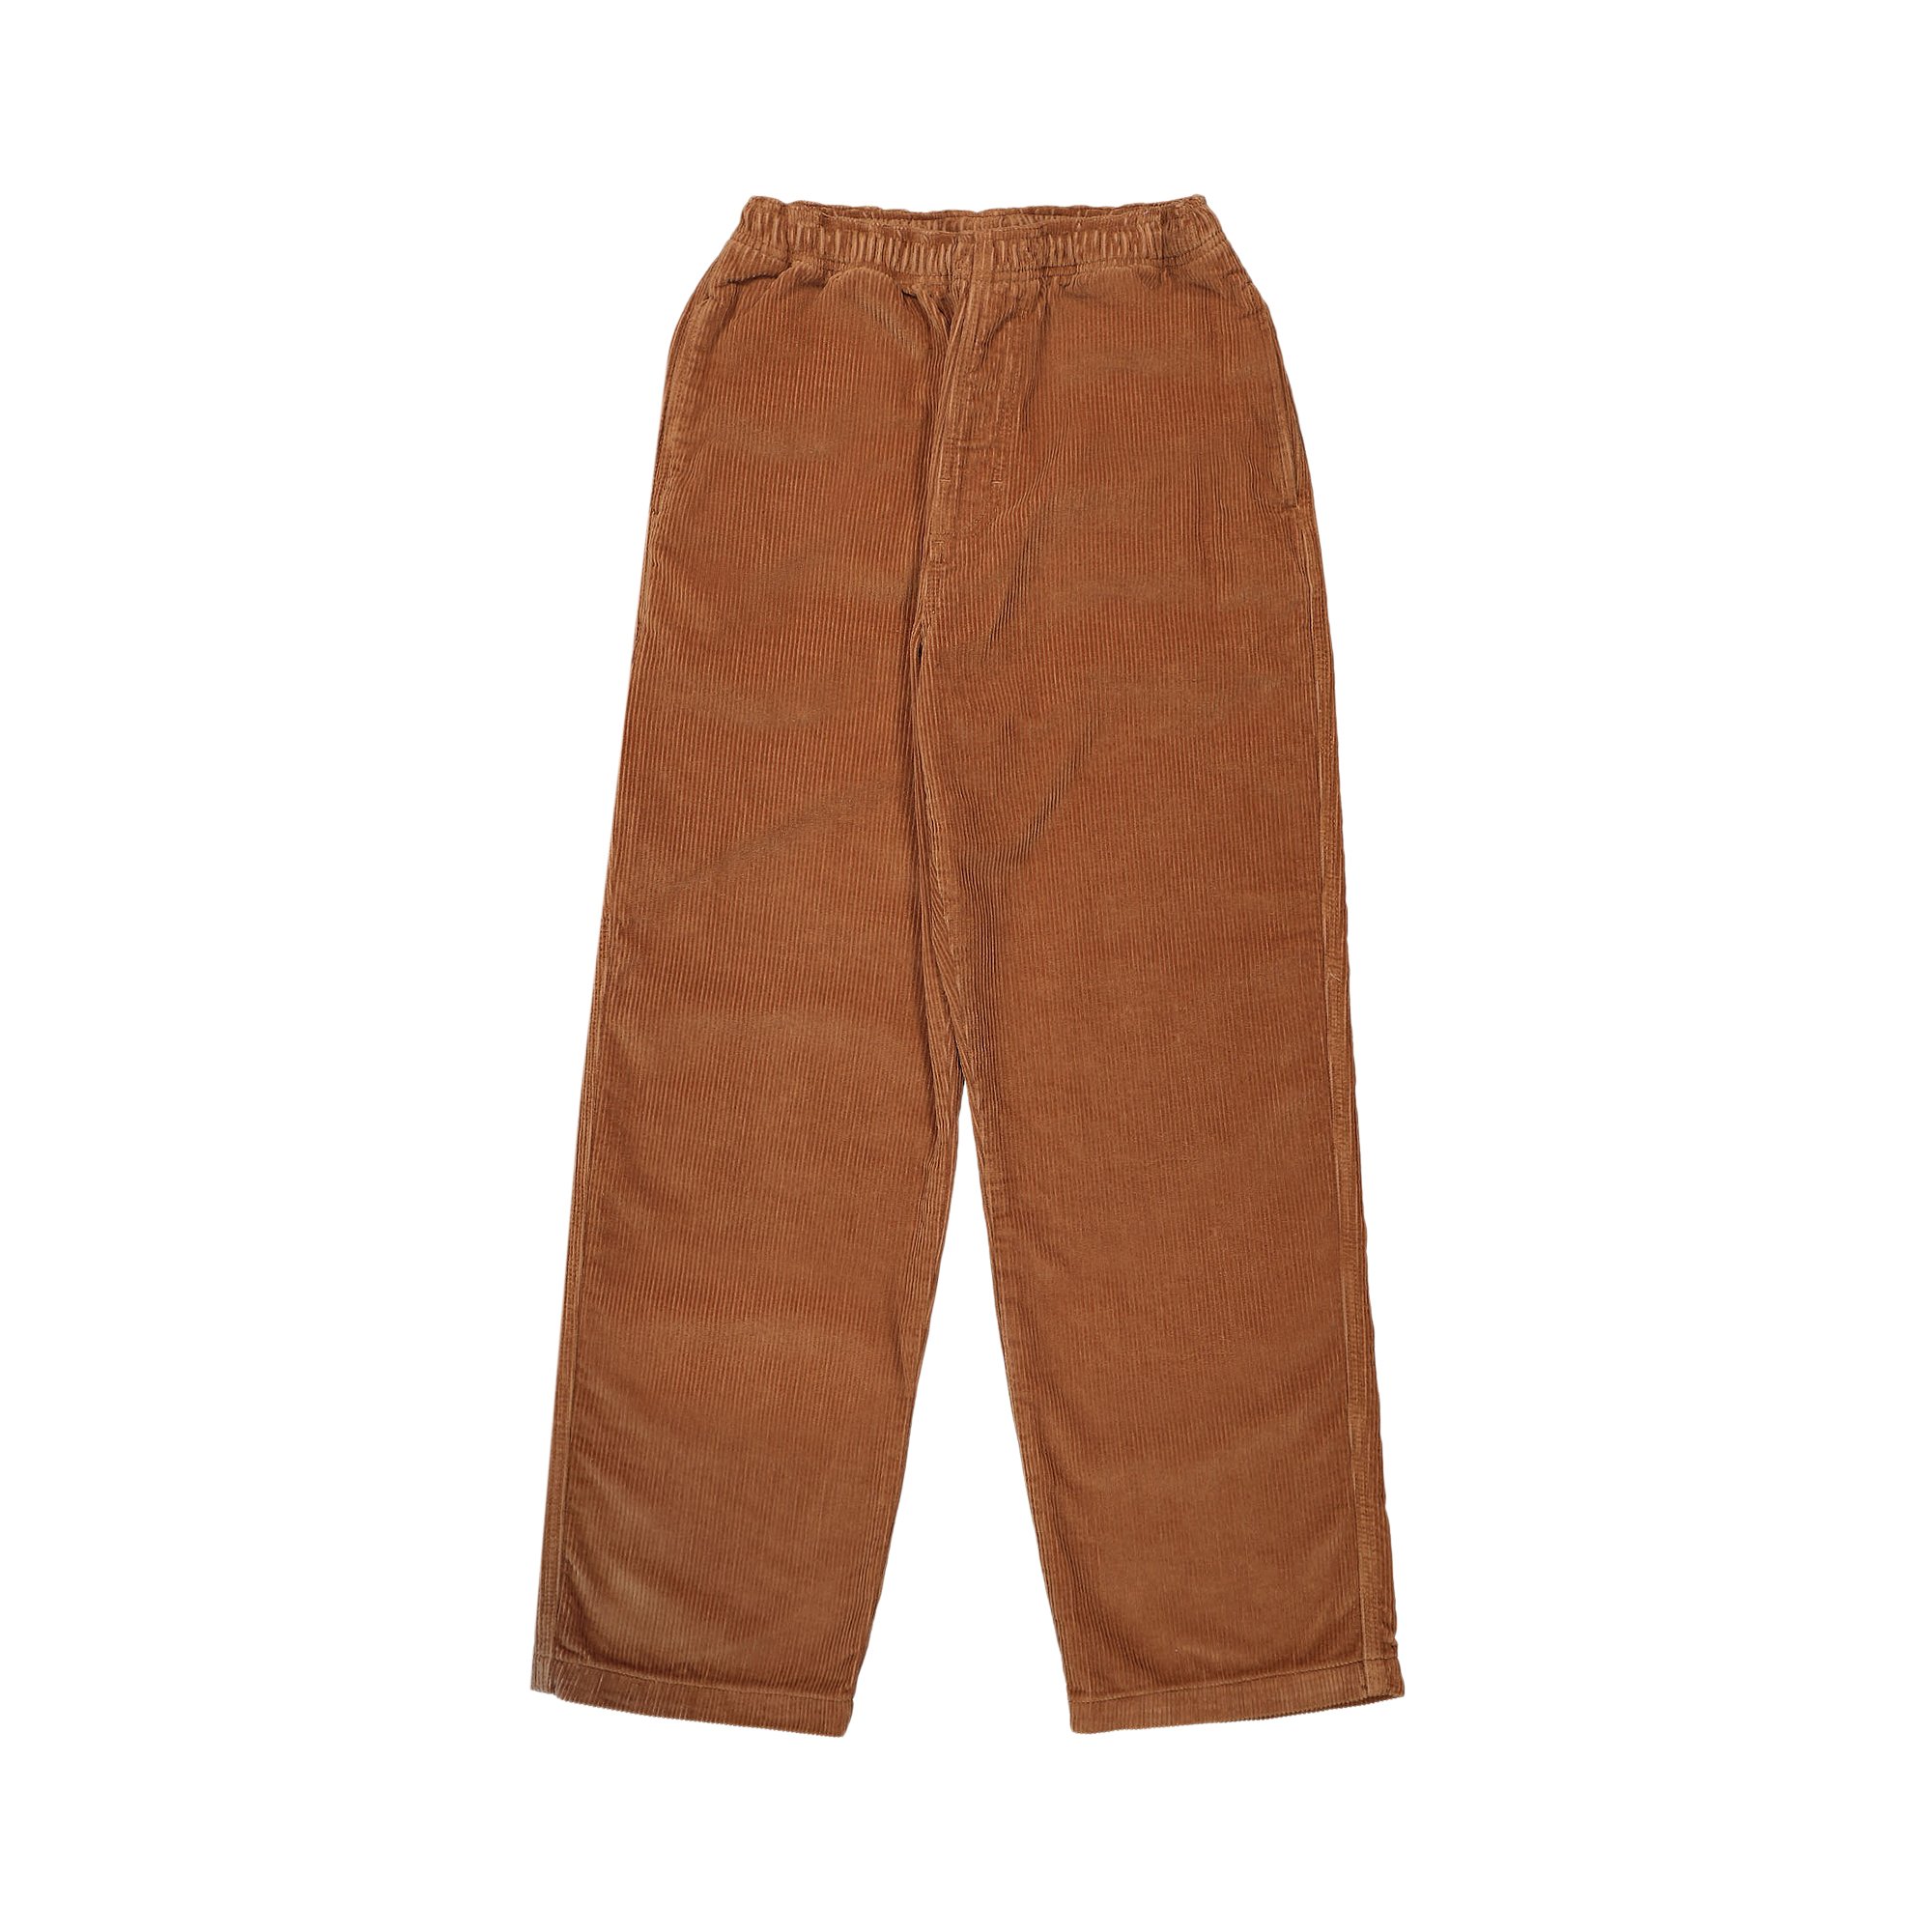 Buy Stussy Wide Wale Cord Beach Pant 'Copper' - 116567 COPP | GOAT